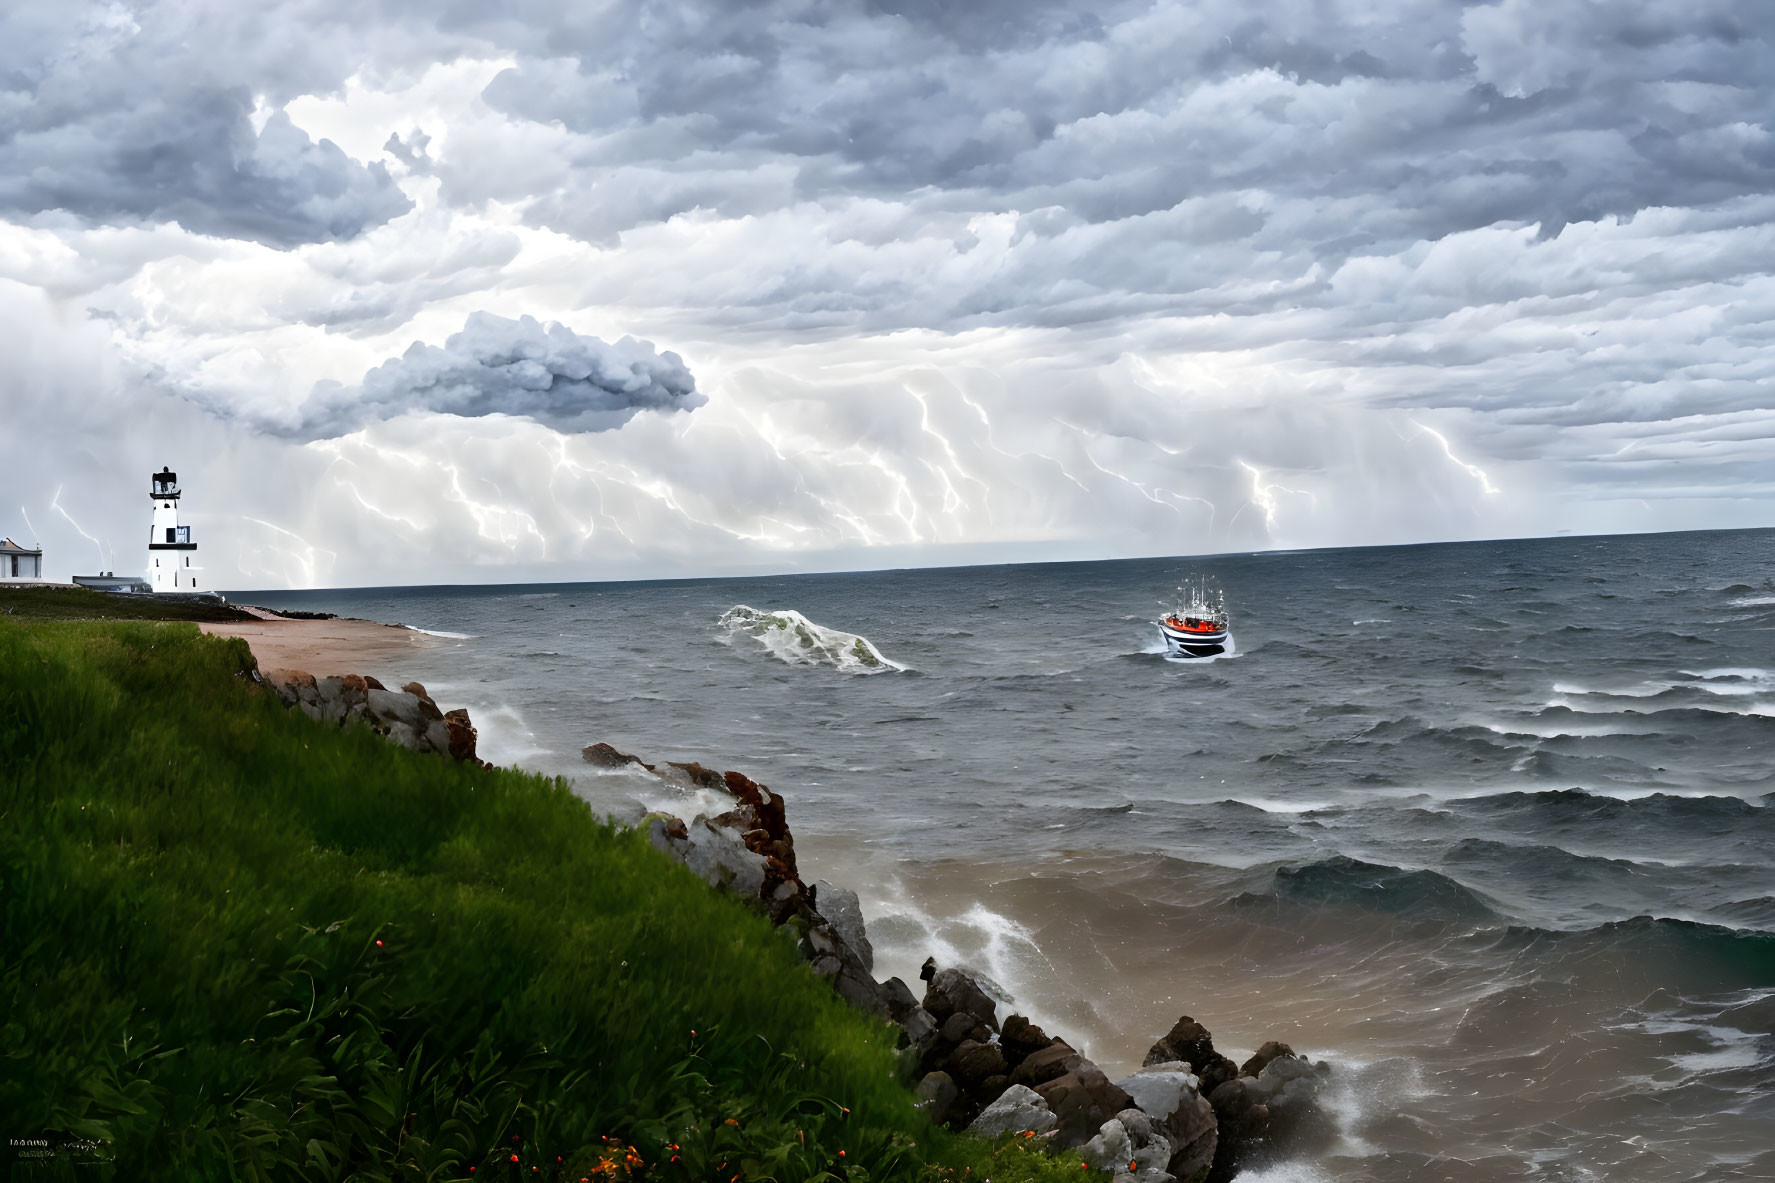 Small boat in choppy waters near rocky shore under dramatic sky with lighthouse before storm.